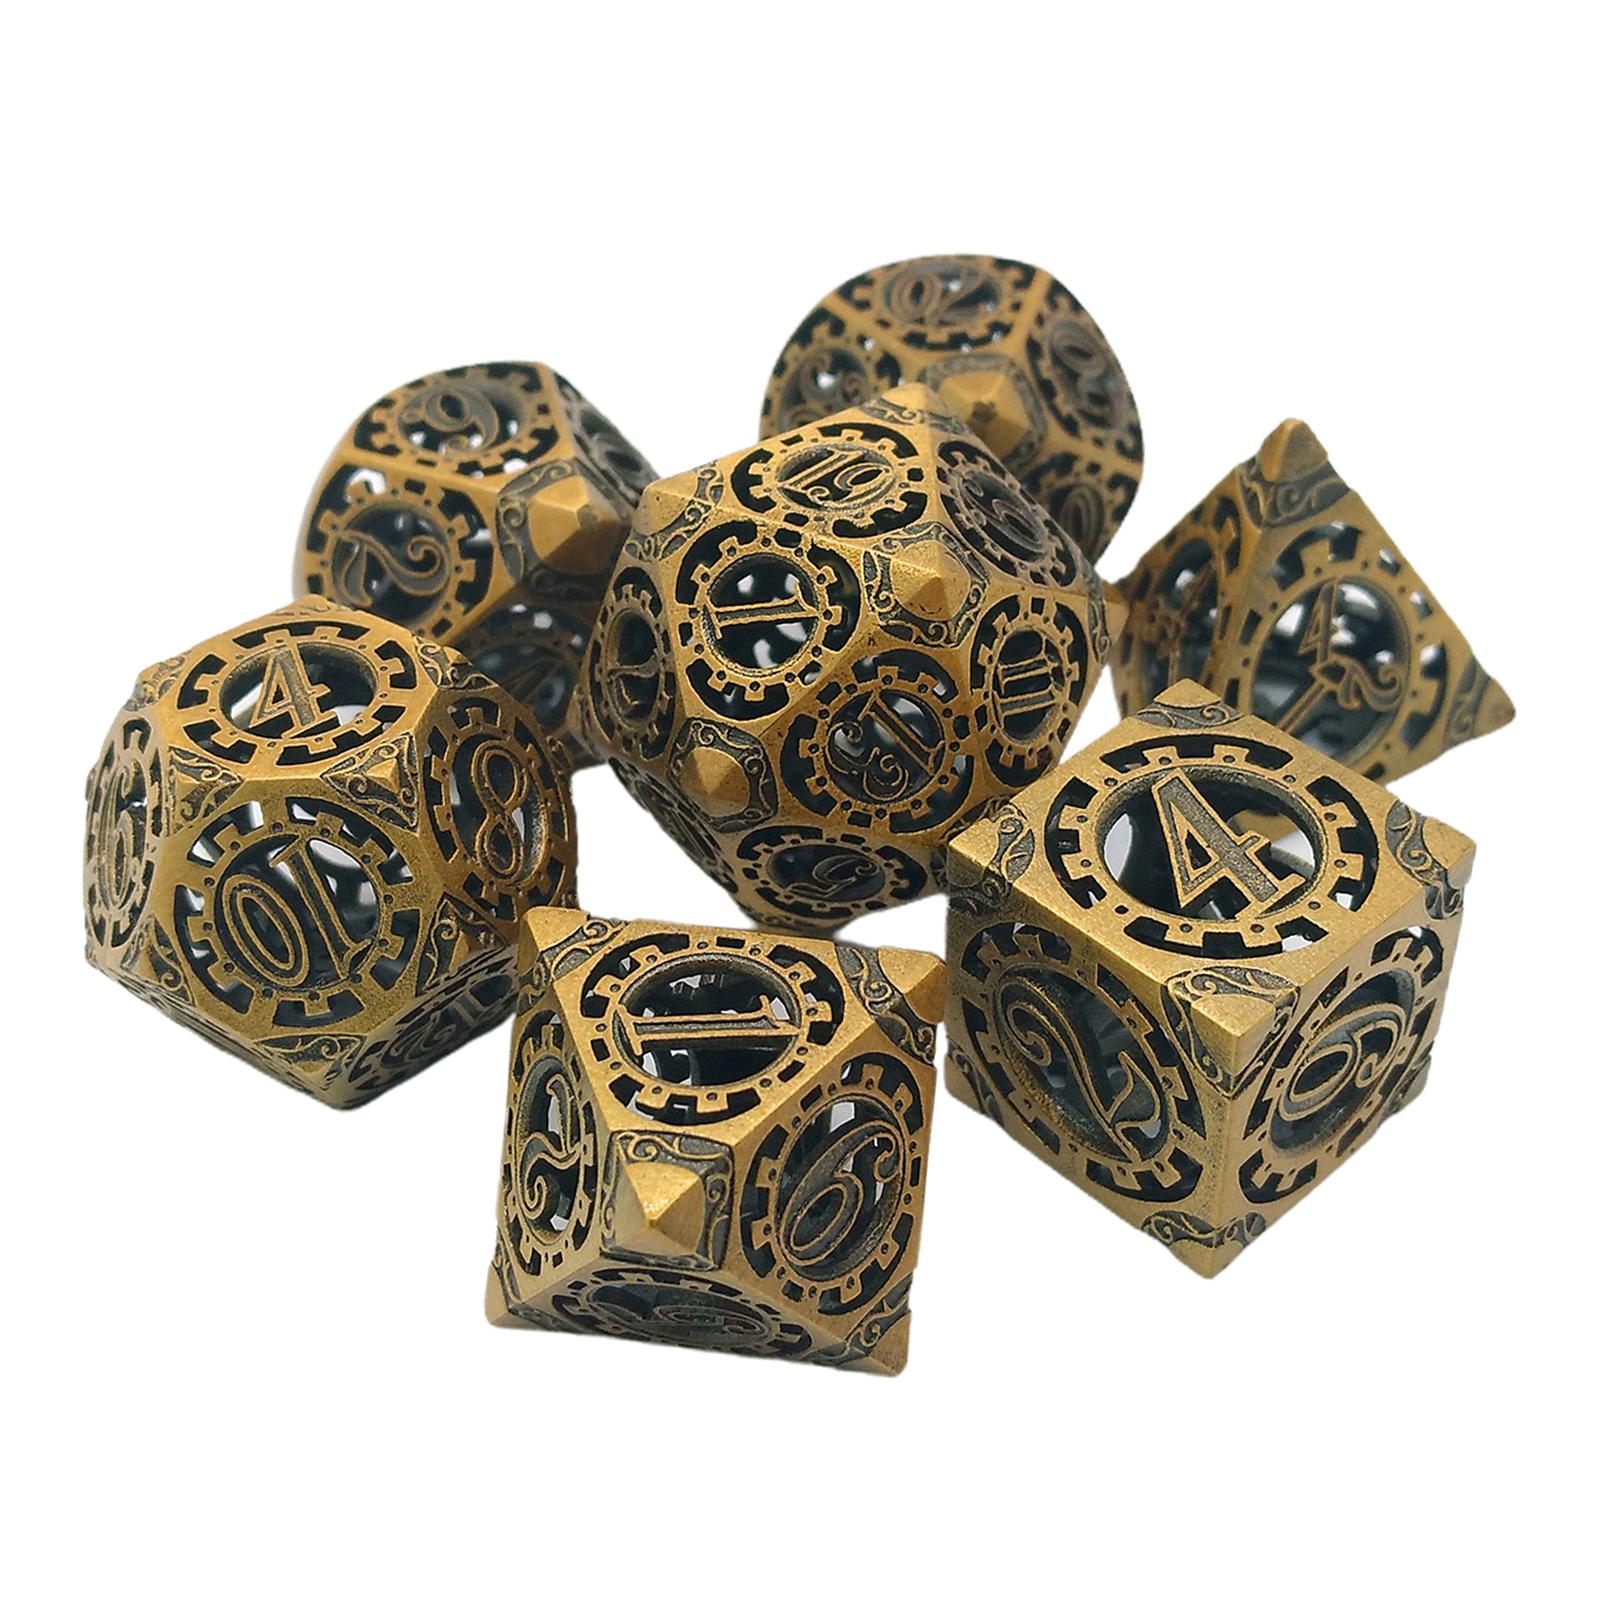 7x Hollow Creative Metal Polyhedral Dice Game for RPG Table Game Golden